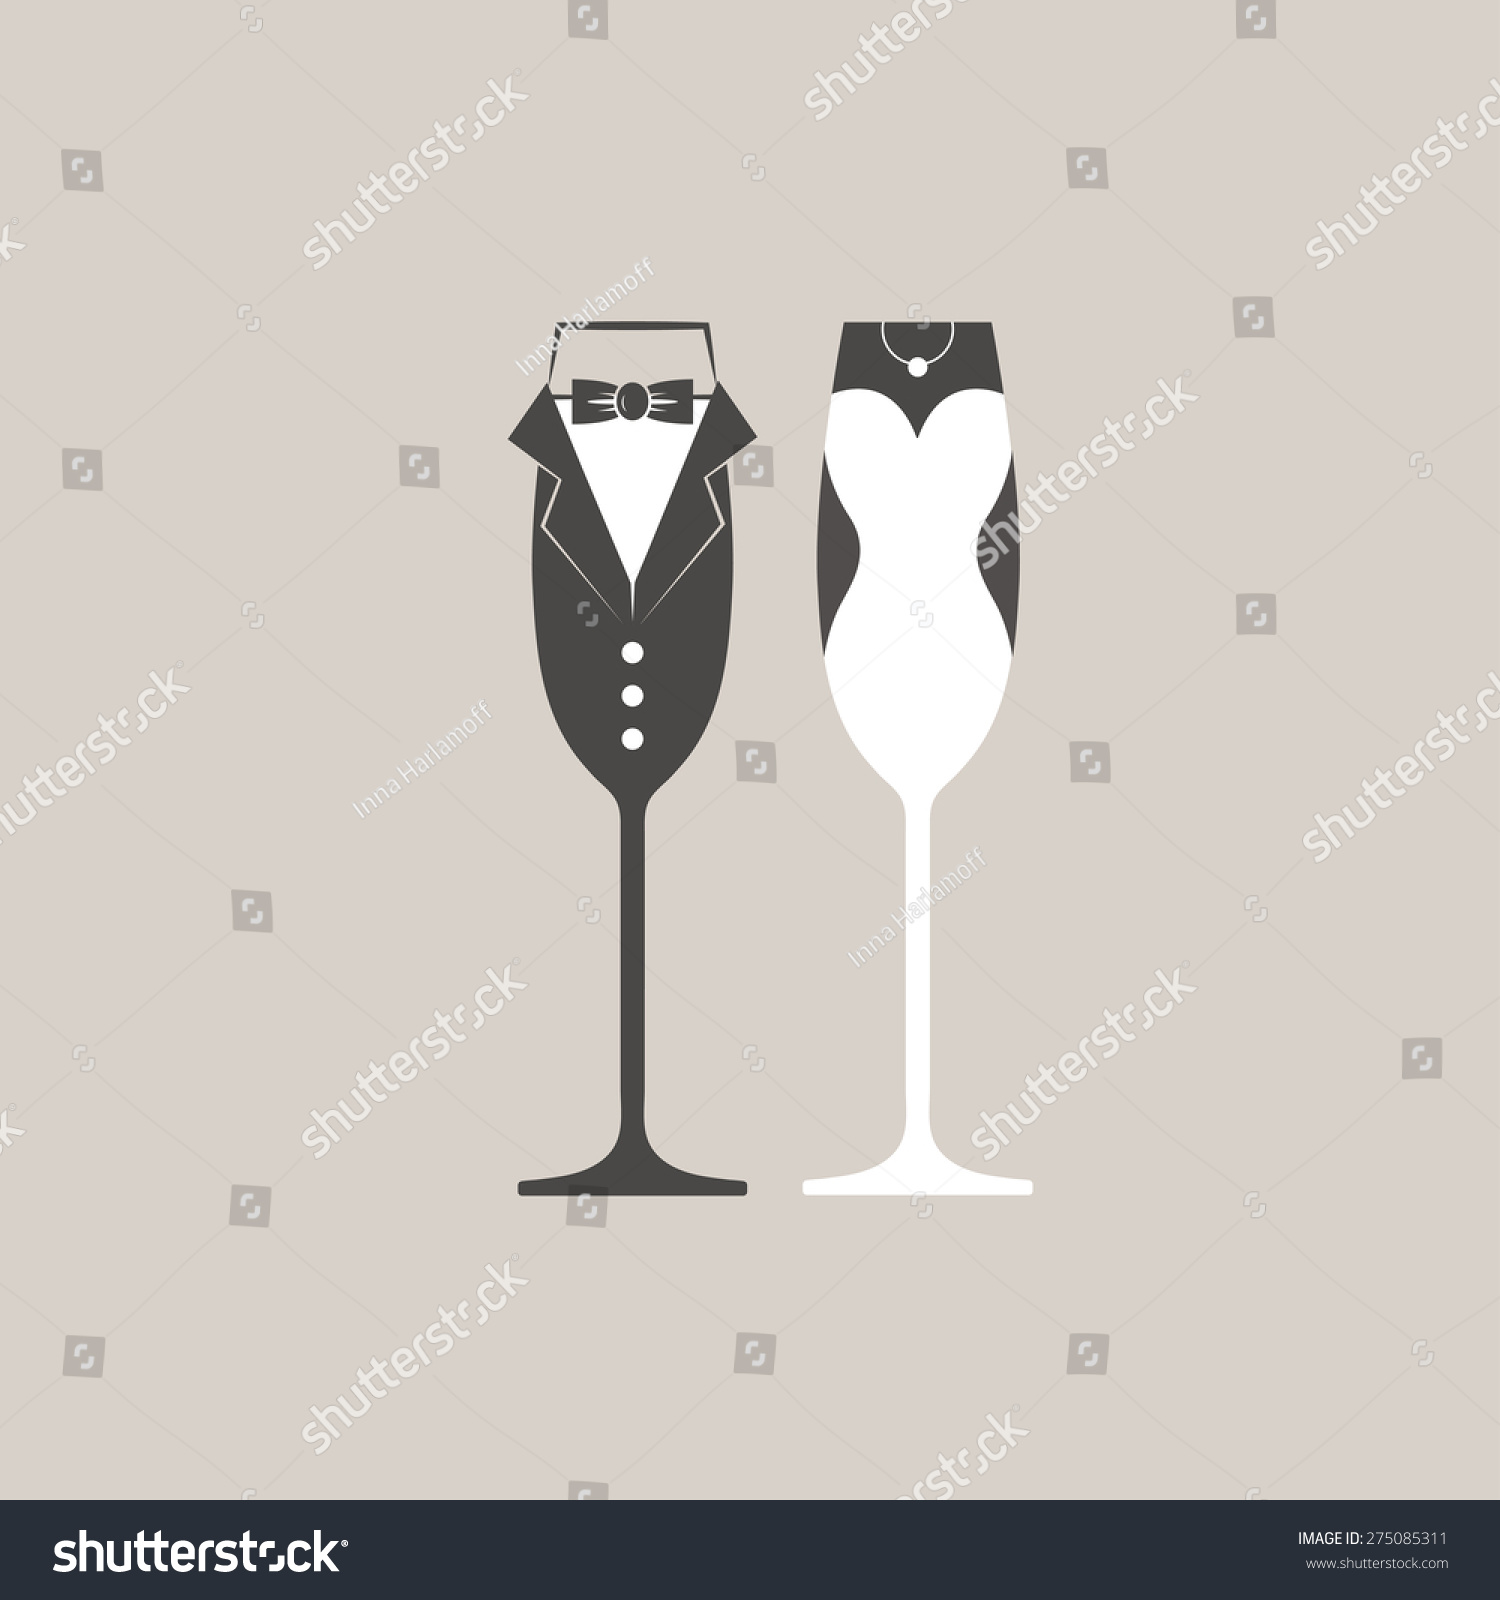 Download Wedding Bride Groom Champagne Flutes Glasses Stock Vector Royalty Free 275085311